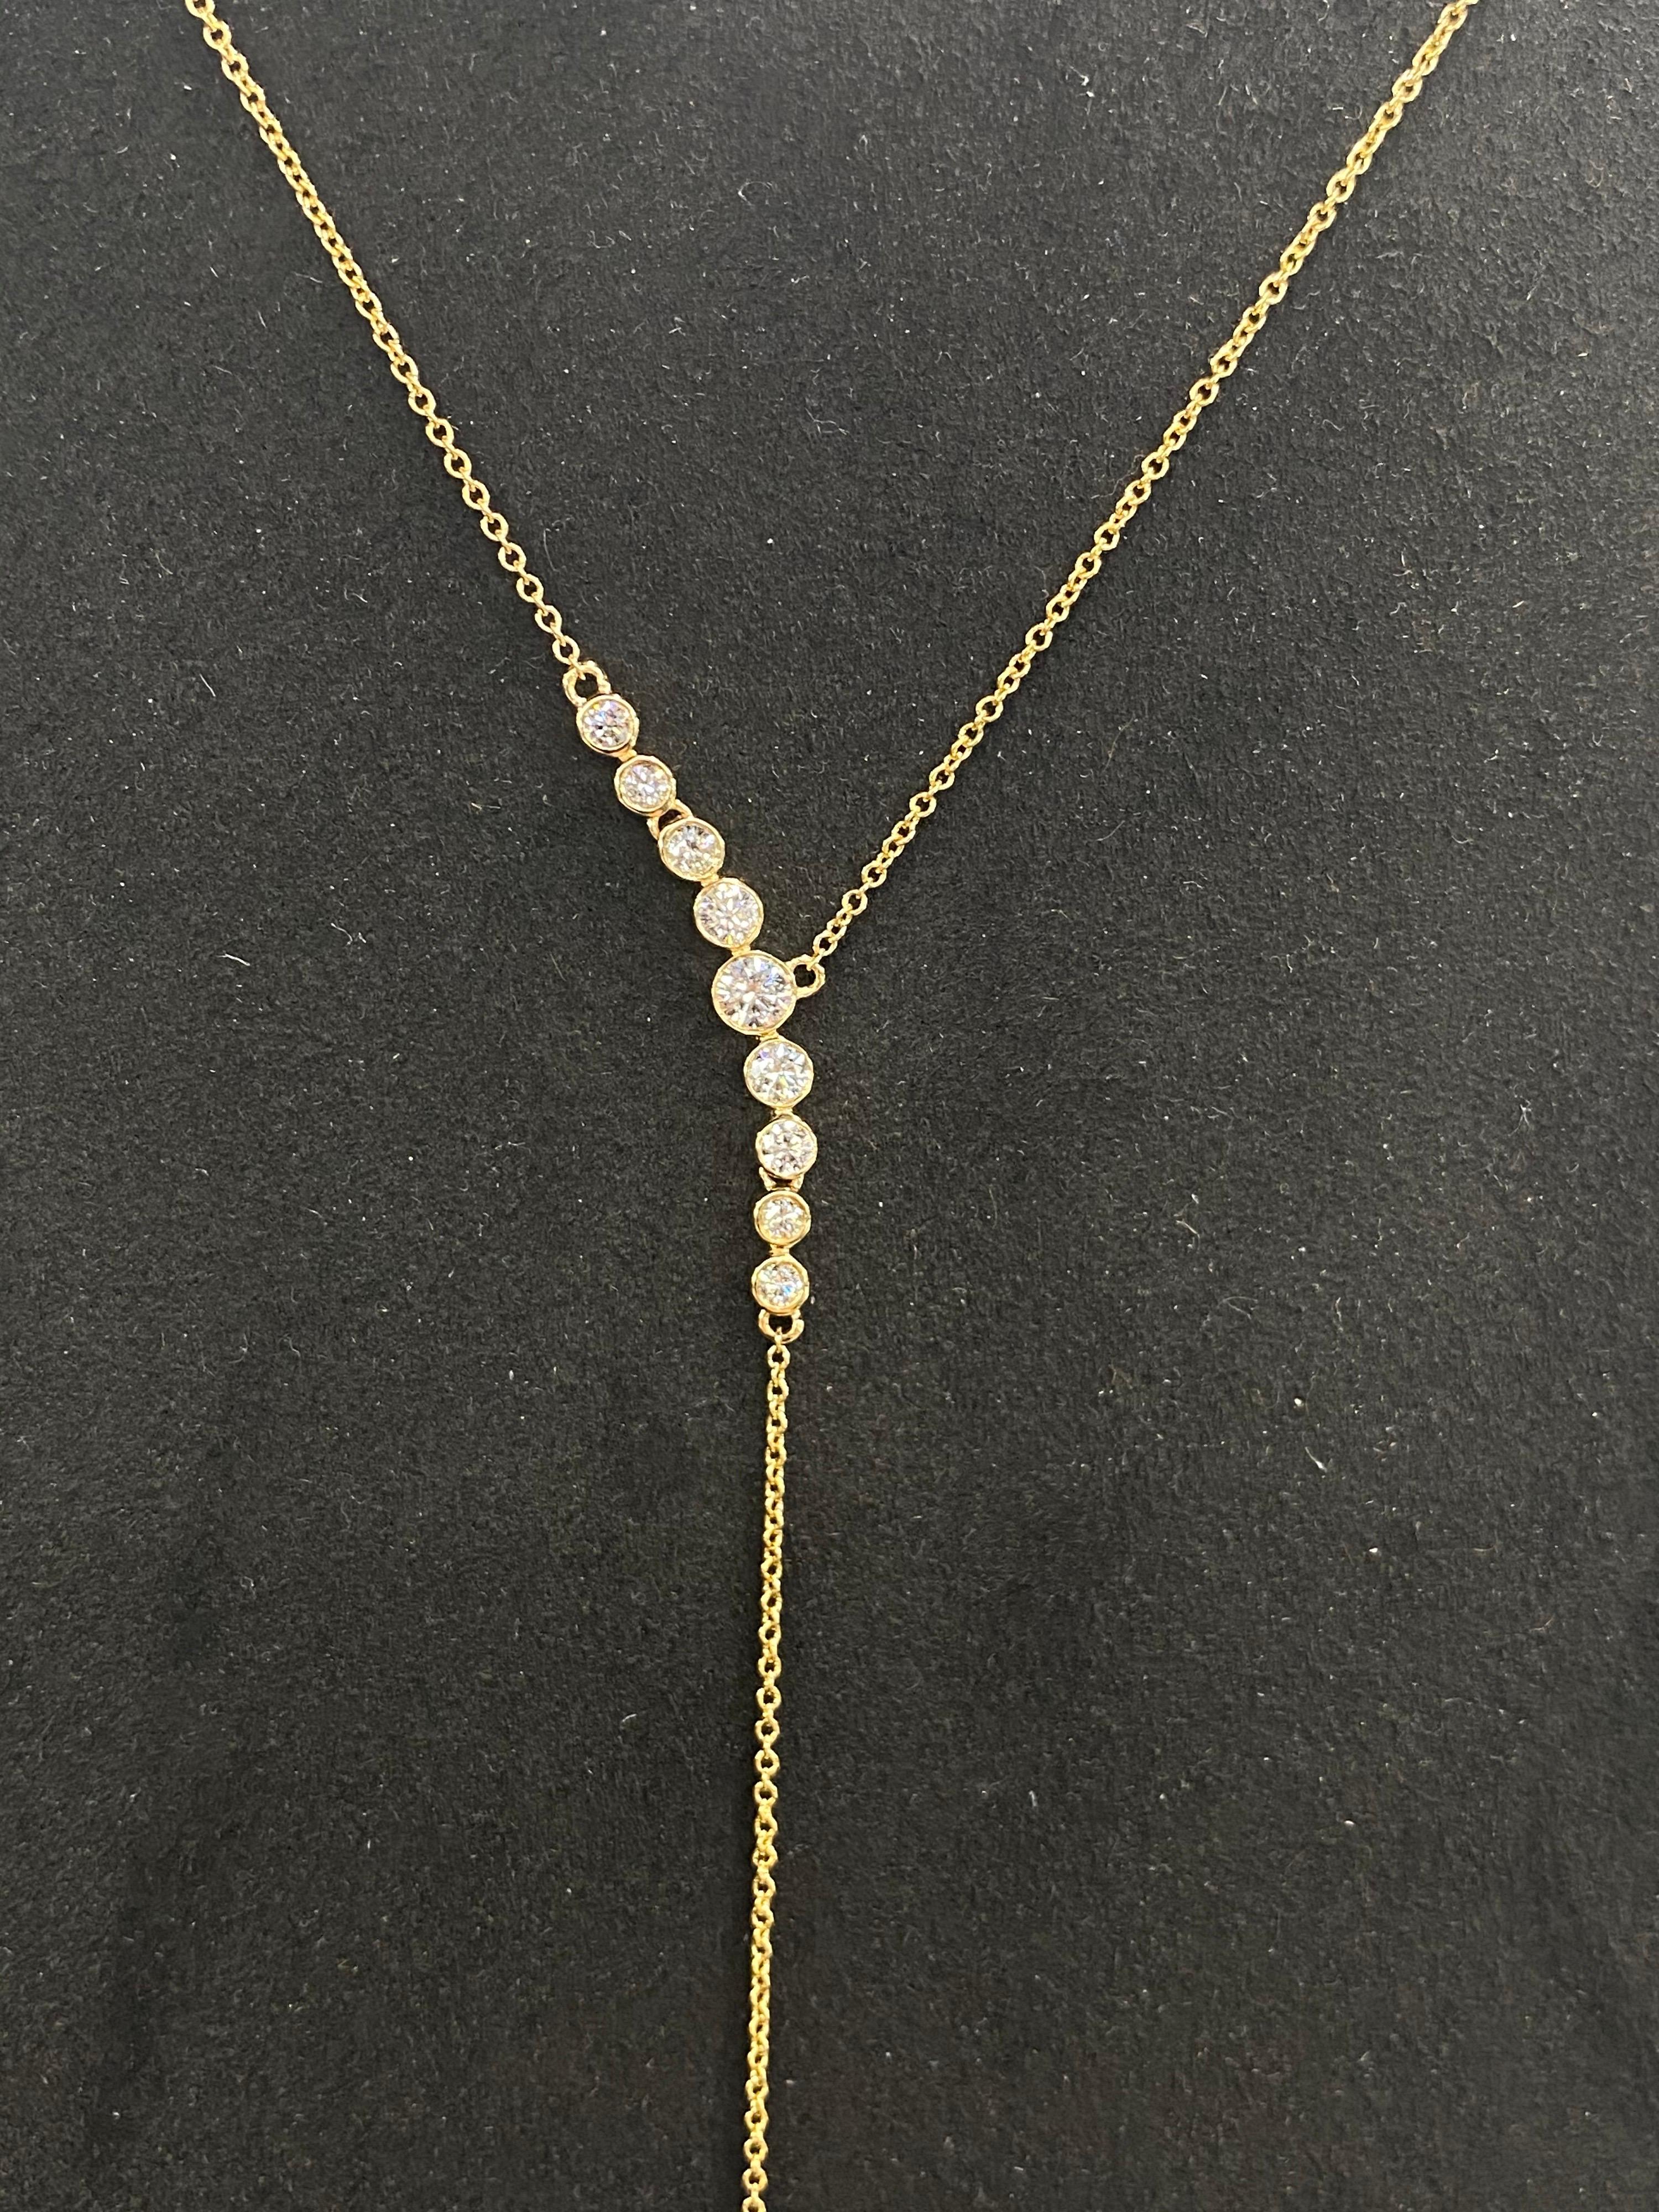 18K Yellow gold lariat necklace featuring 8 round brilliants weighing 0.31 carats with a South Sea Pearl drop measuring 13-14 mm and two round diamonds weighing 0.20 carats.
Color G-H
Clarity SI

Pearl can be changed to a Pink, Golden or Tahitian